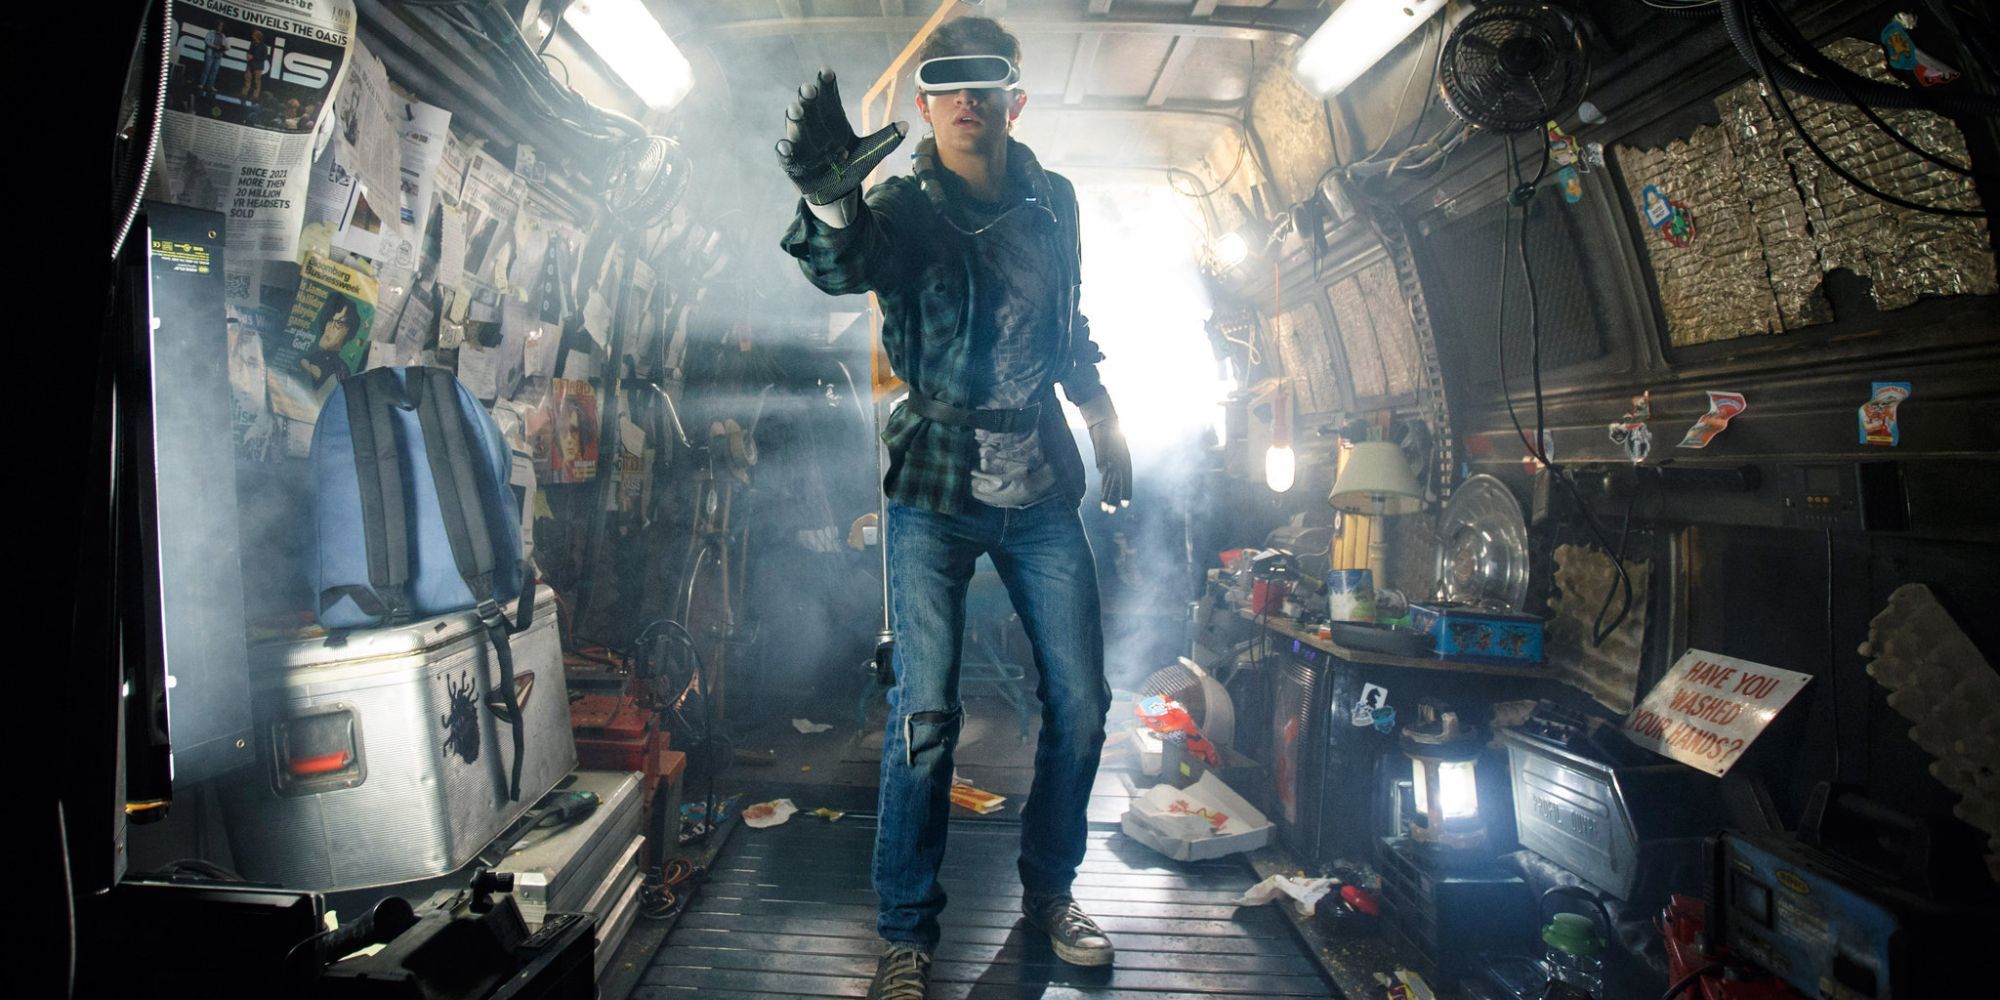 A teenage boy wears an advanced virtual reality set in the confines of a van in 'Ready Player One' (2018)